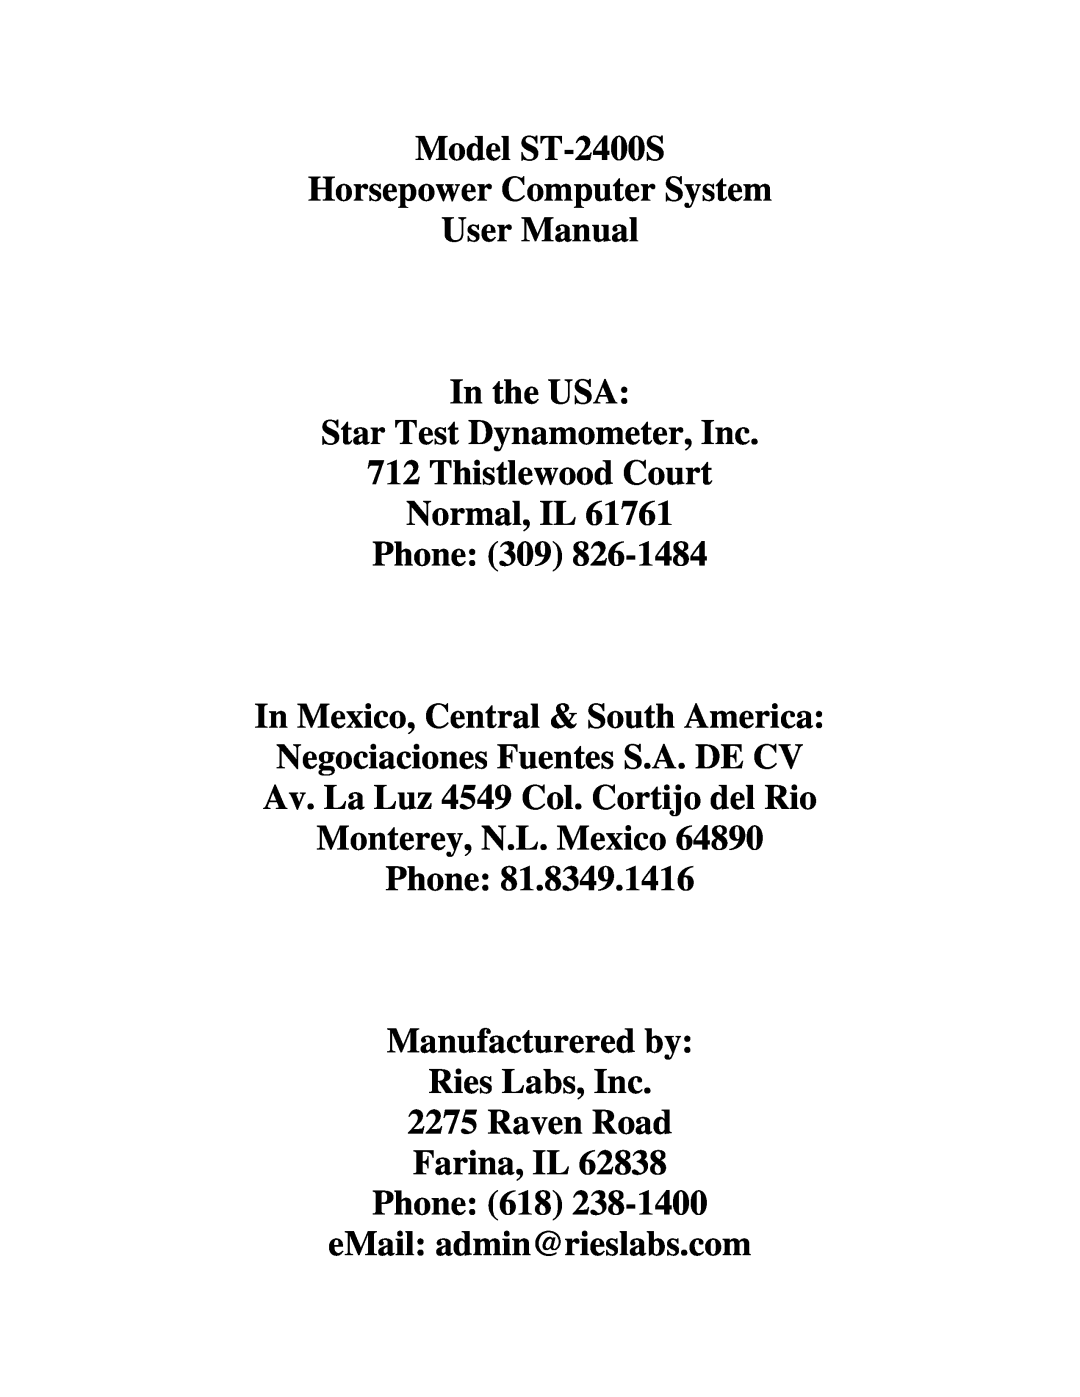 Powerware user manual Model ST-2400S Horsepower Computer System User Manual In the USA, eMail admin@rieslabs.com 